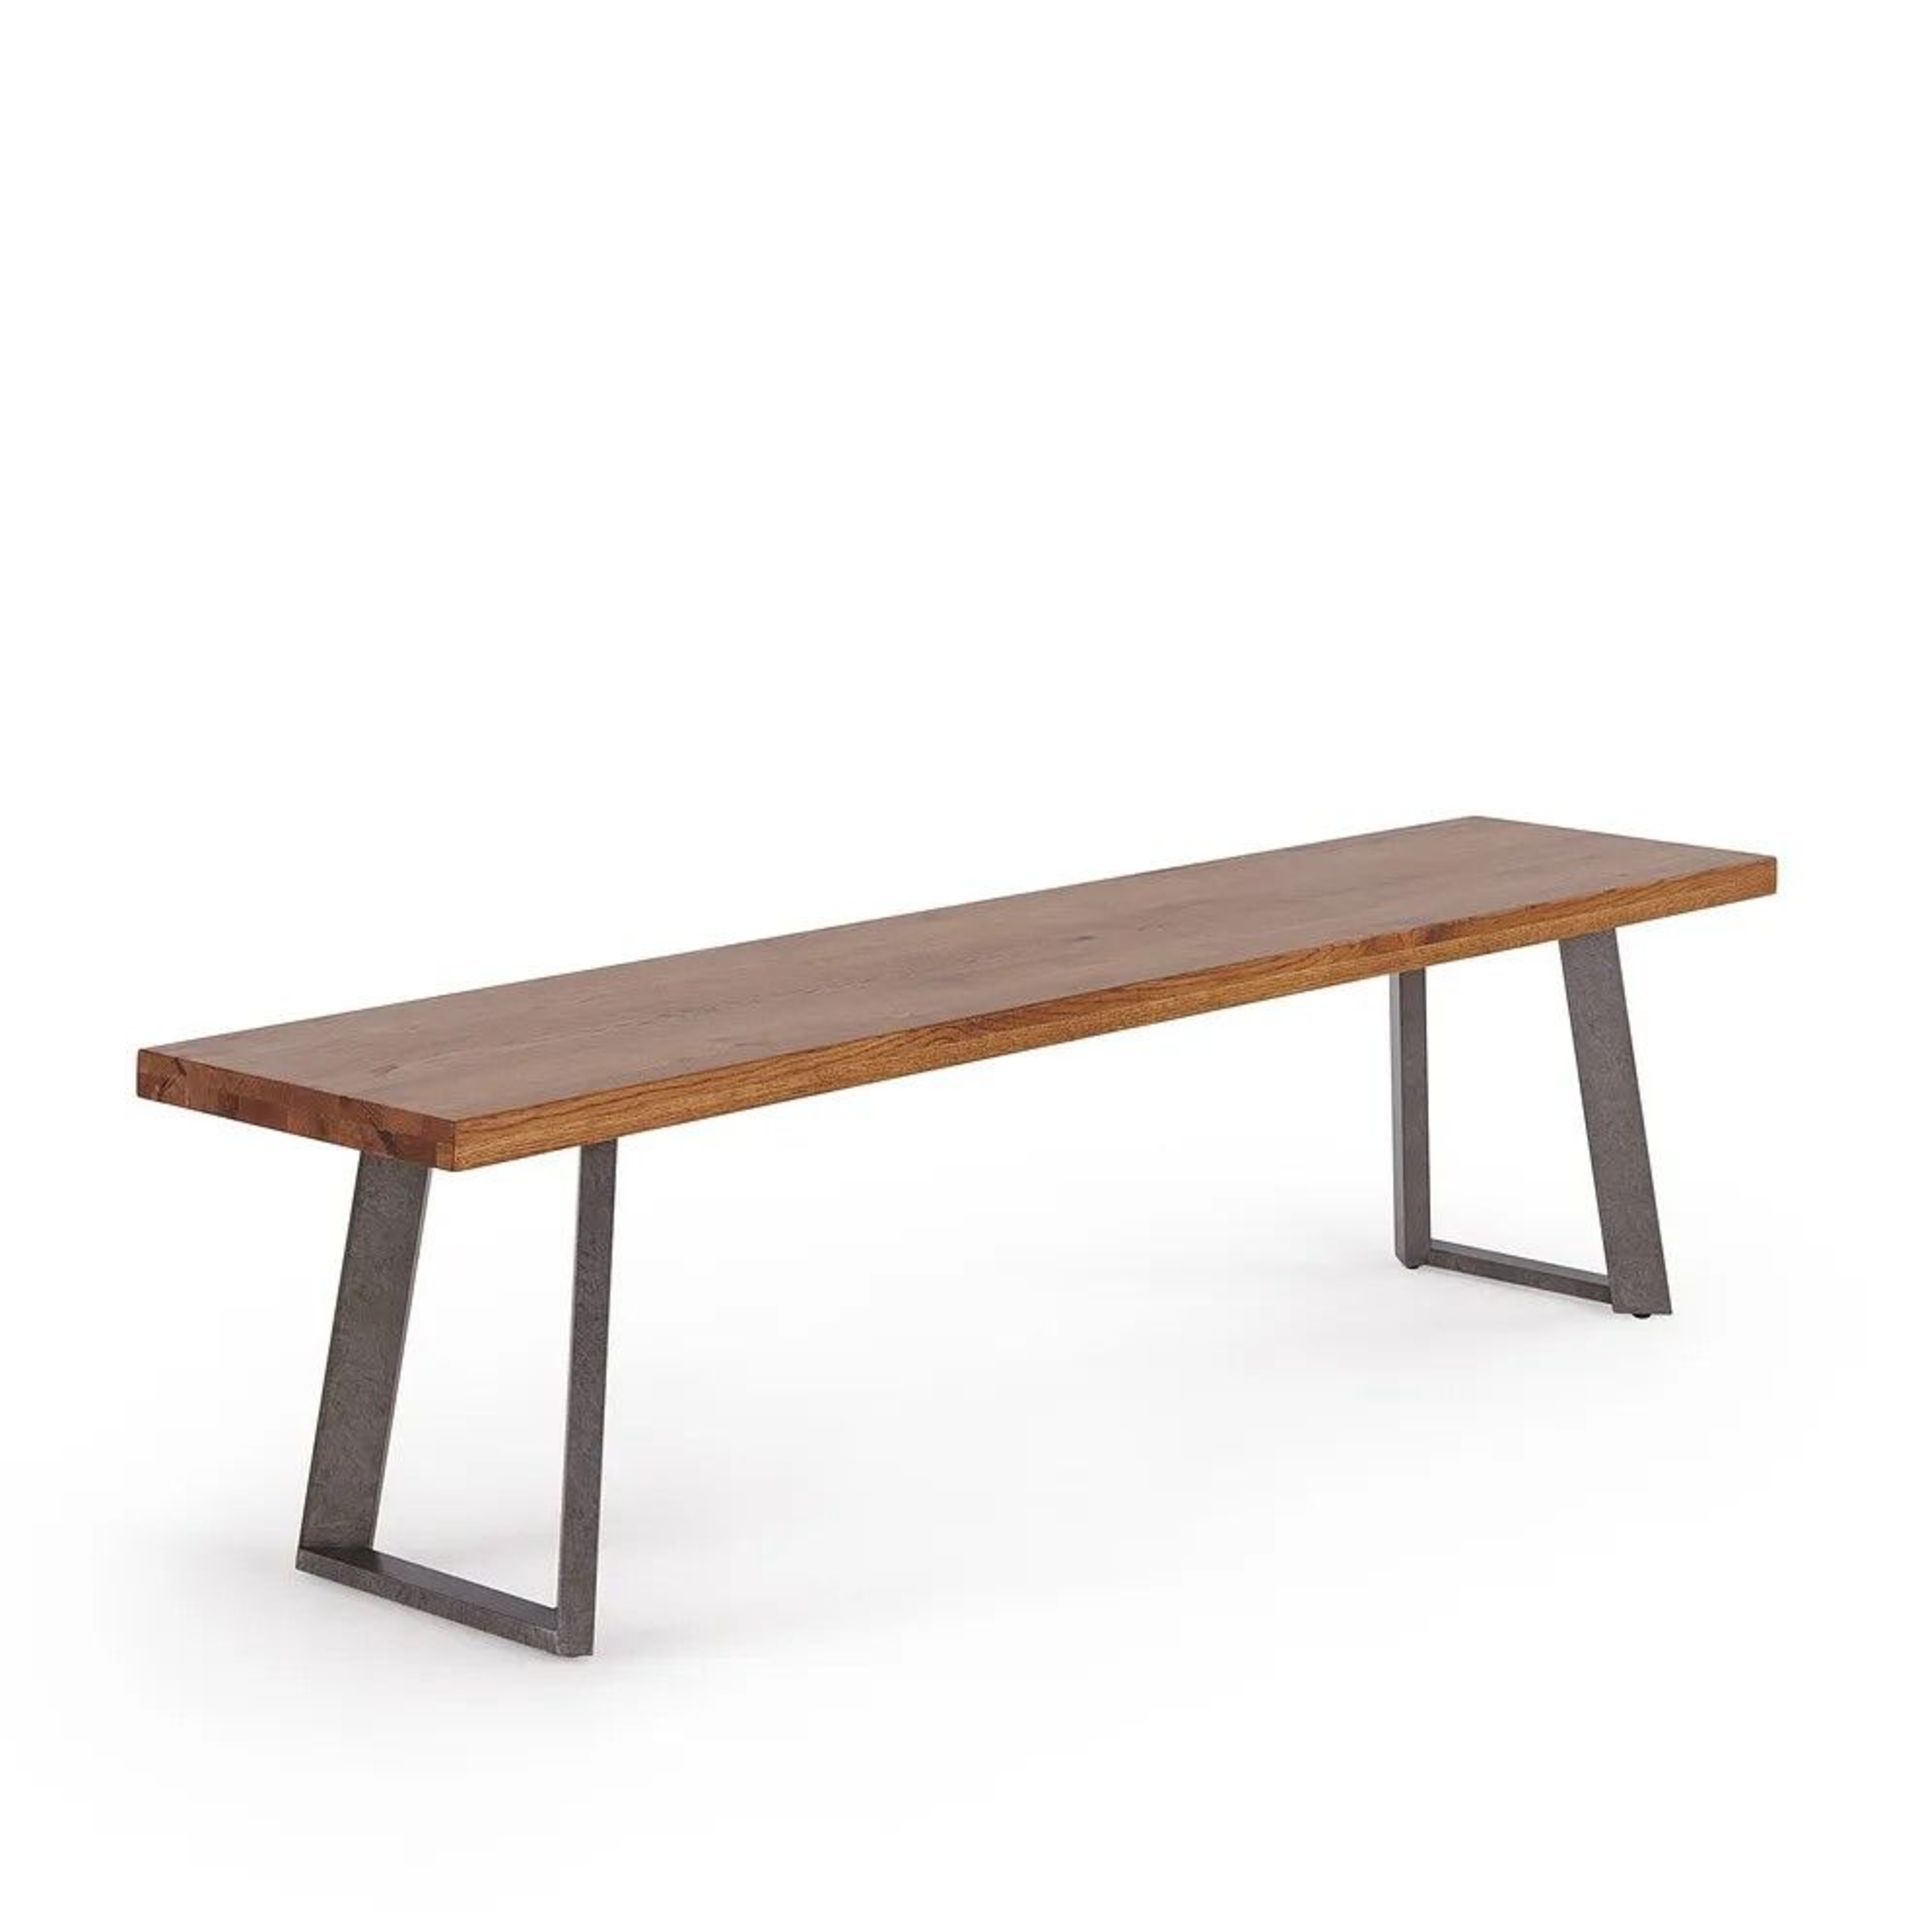 New Boxed - Cantilever Rustic Solid Oak & Metal Bench. 180cm Long. RRP £330 EACH. For a more open